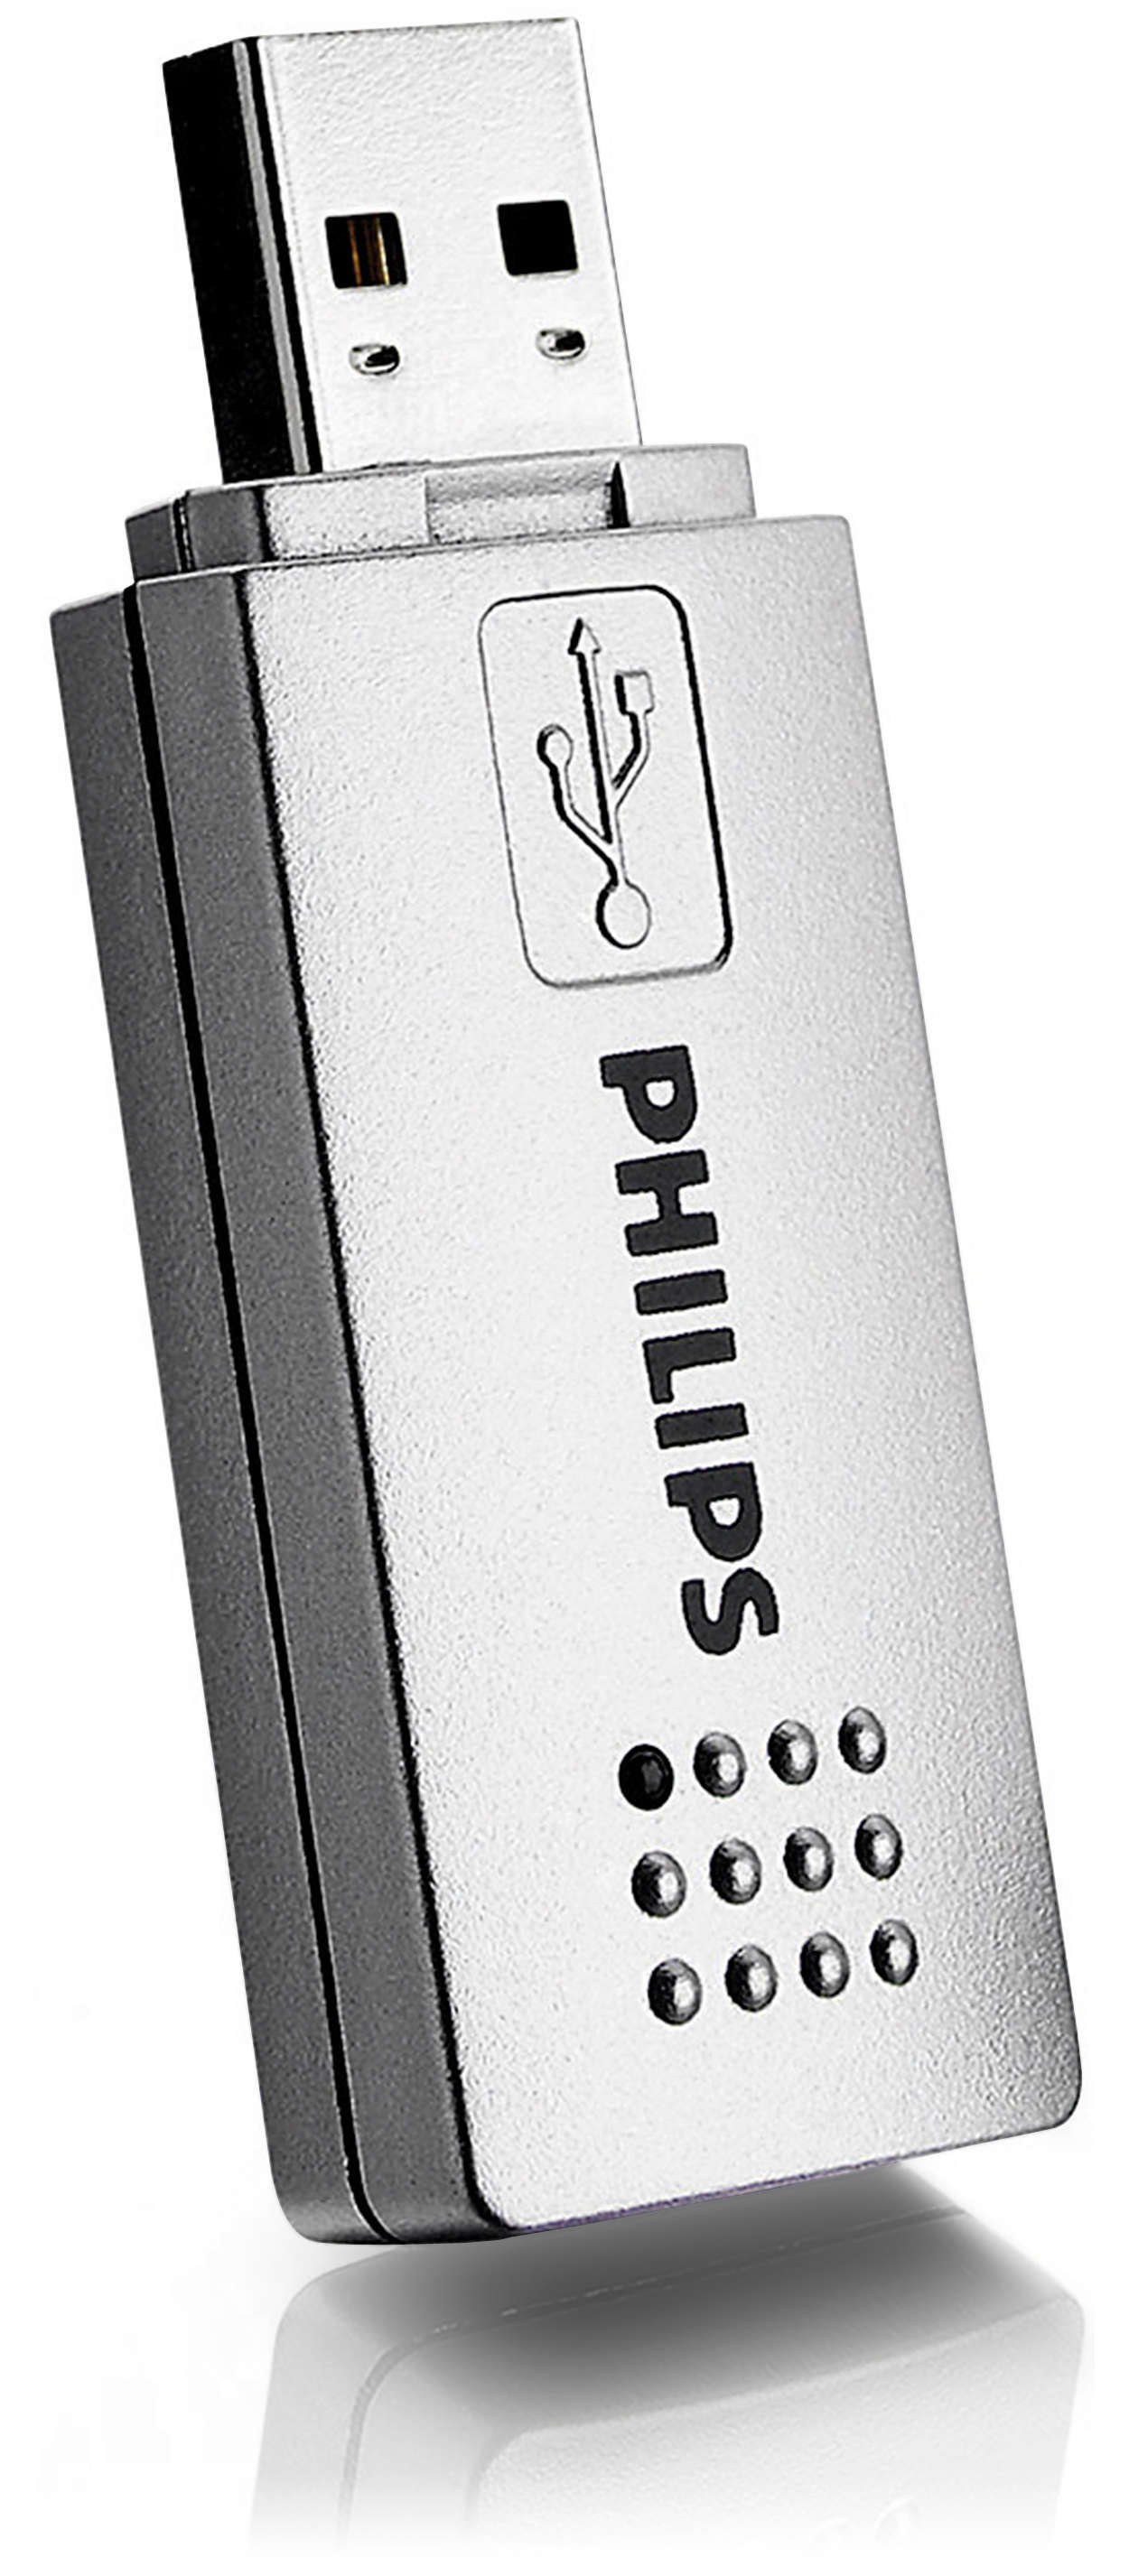 Designed by installers, made by Philips